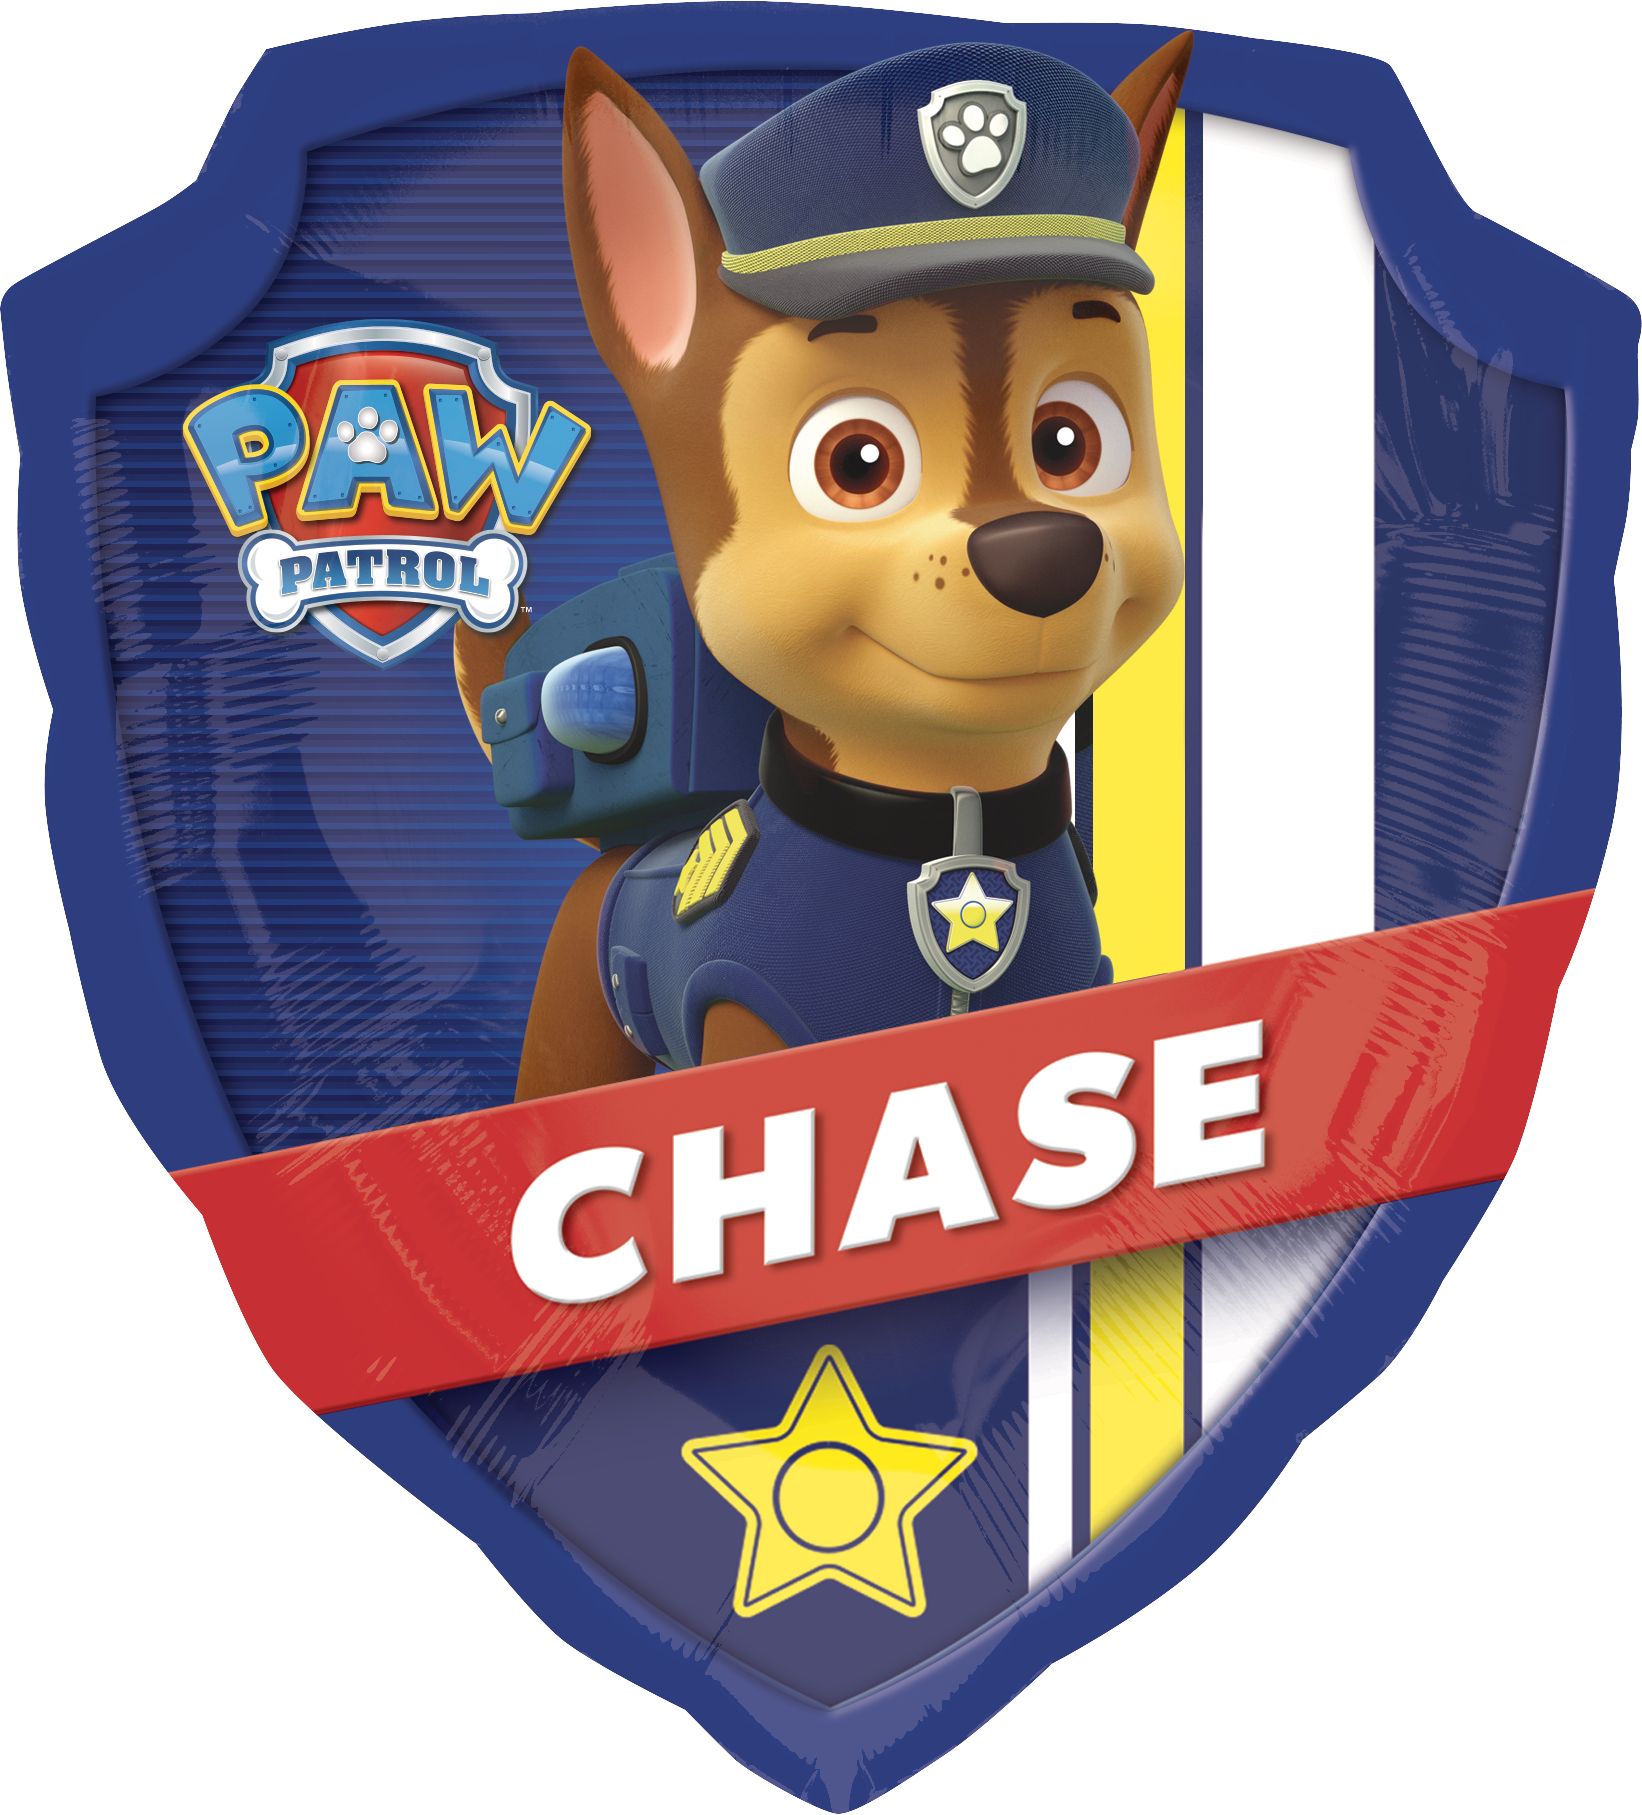 Nickelodeon PAW Patrol Chase Dog Satin Giant Gliding Air-Walker Foil  Balloon, Blue/Brown, 54-in, Helium Inflation & Ribbon Included for Birthday  Party